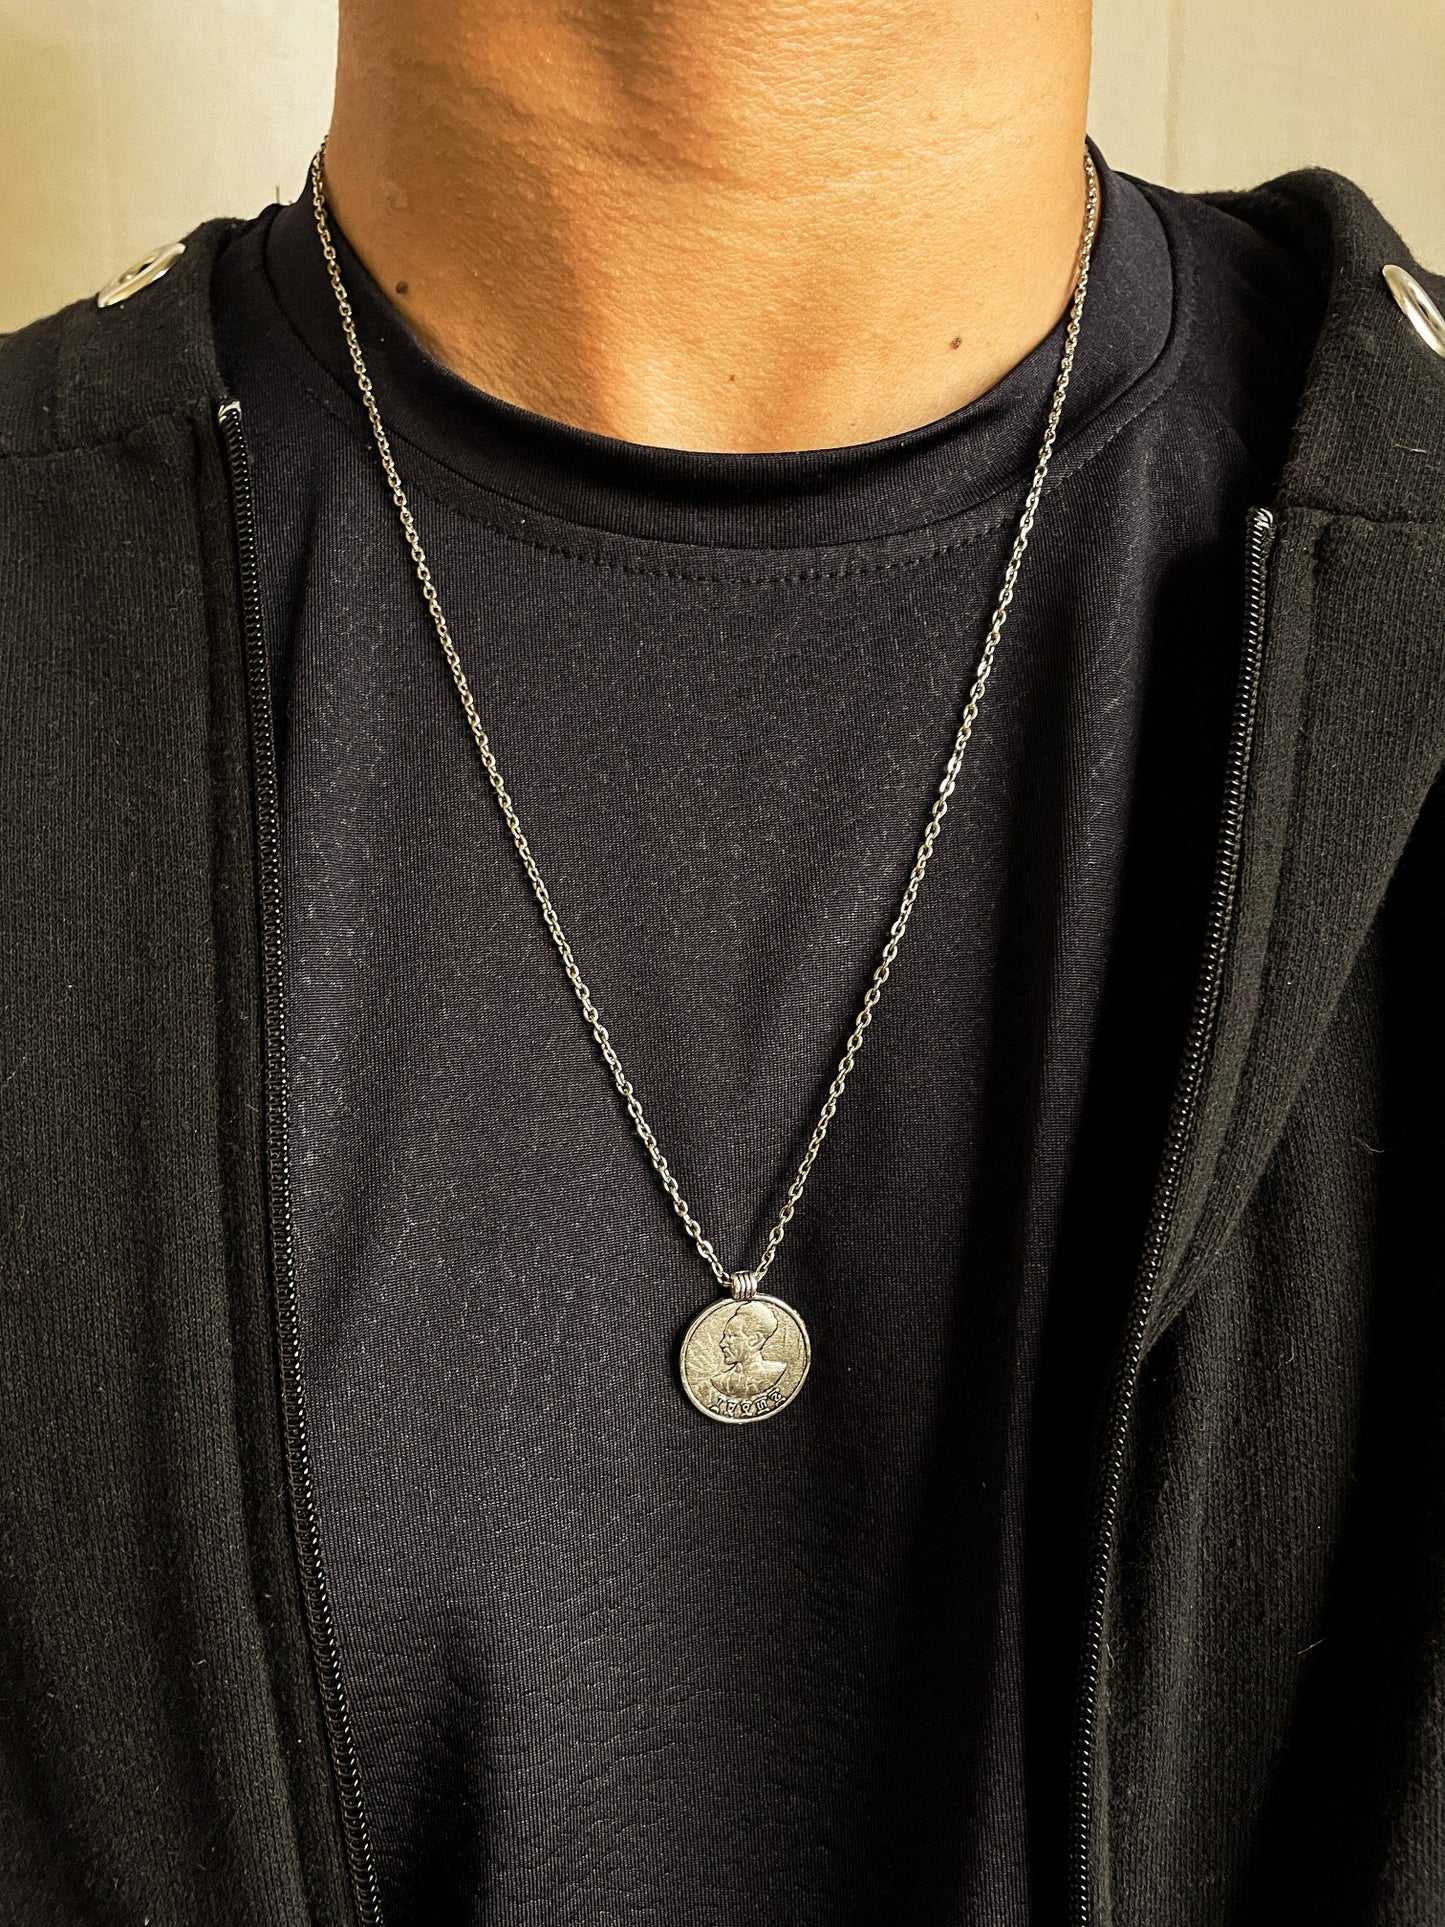 Man Face Silver Coin Pendant With Chain